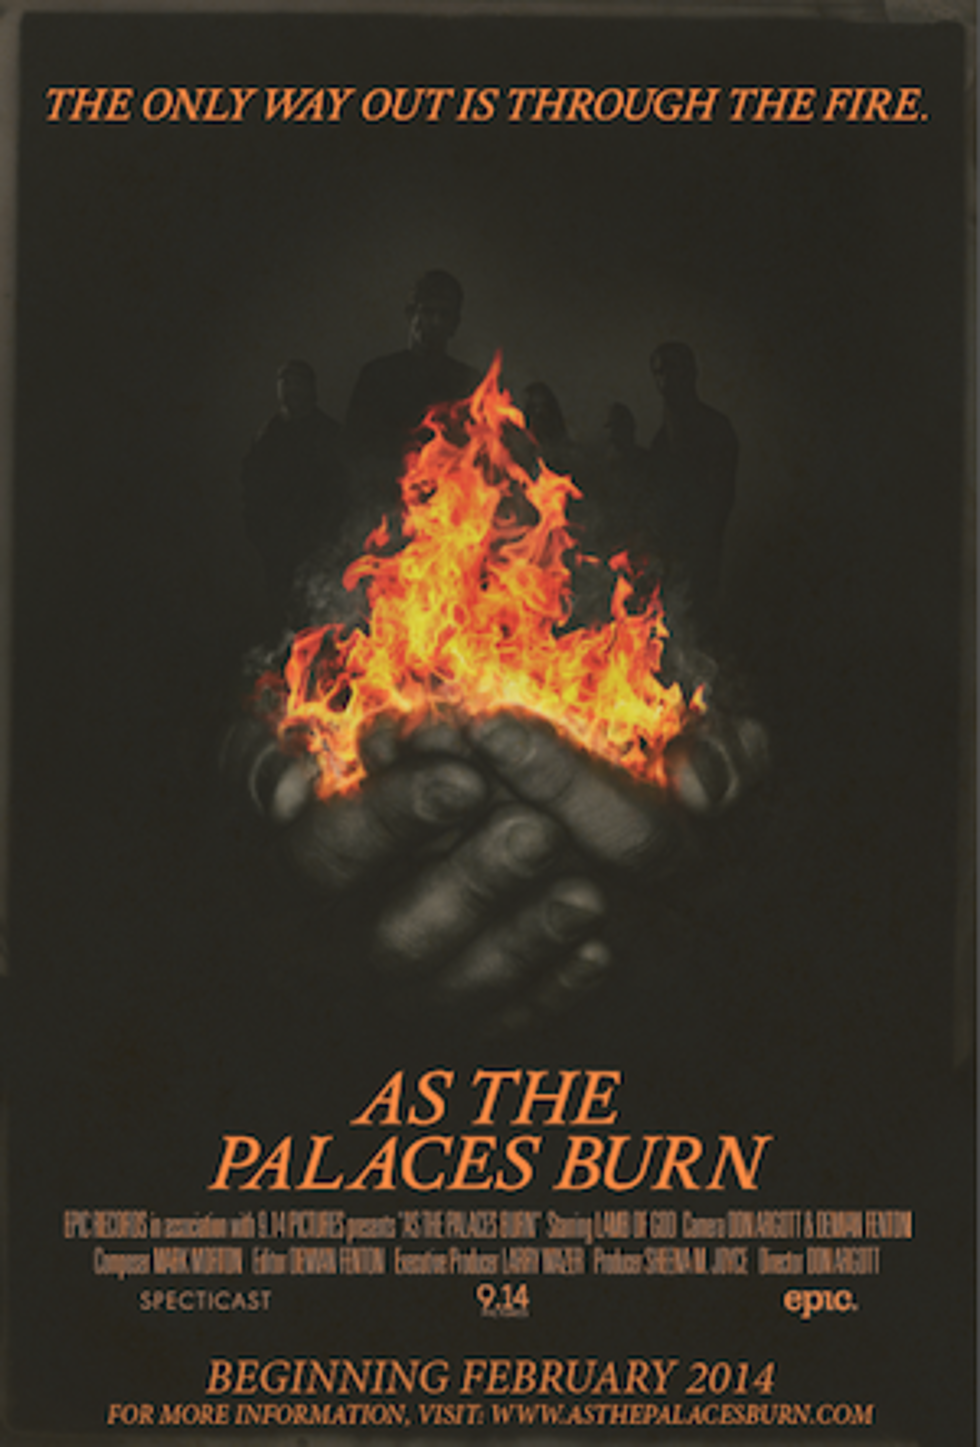 97 Rock Nation Winners &#8211; Lamb of God “As The Palaces Burn” Movie Passes